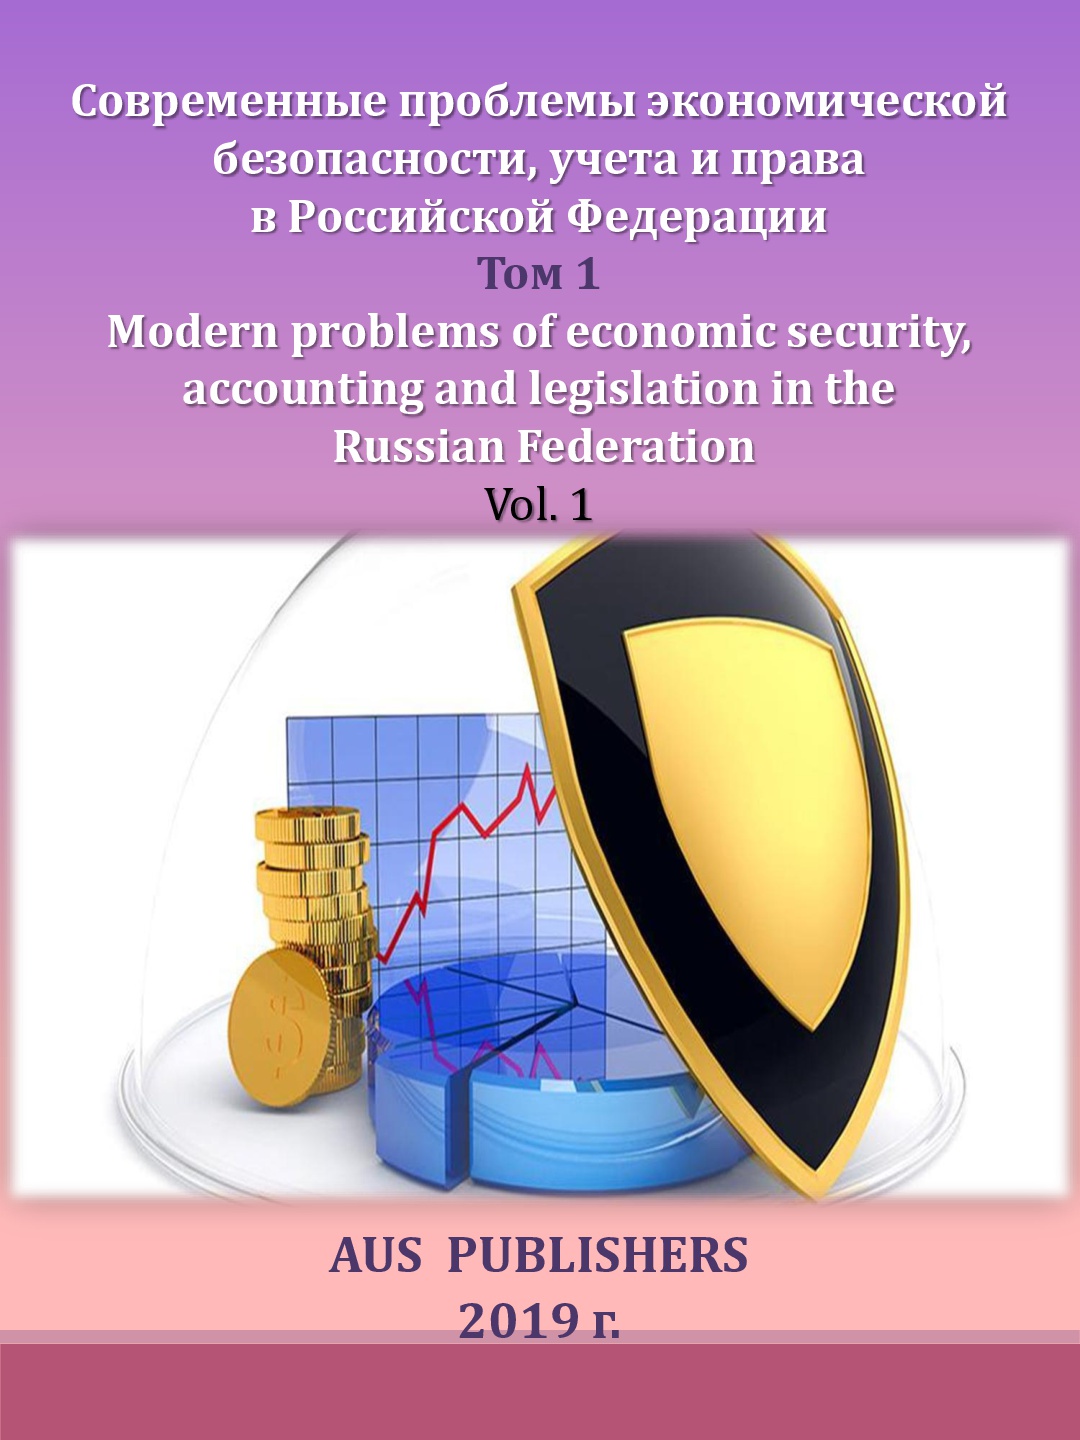                         UNEVEN SOCIAL AND ECONOMIC DEVELOPMENT OF THE REGIONS OF THE RUSSIAN FEDERATION AS A THREAT TO ECONOMIC SECURITY AND METHODS OF ITS SOLUTION
            